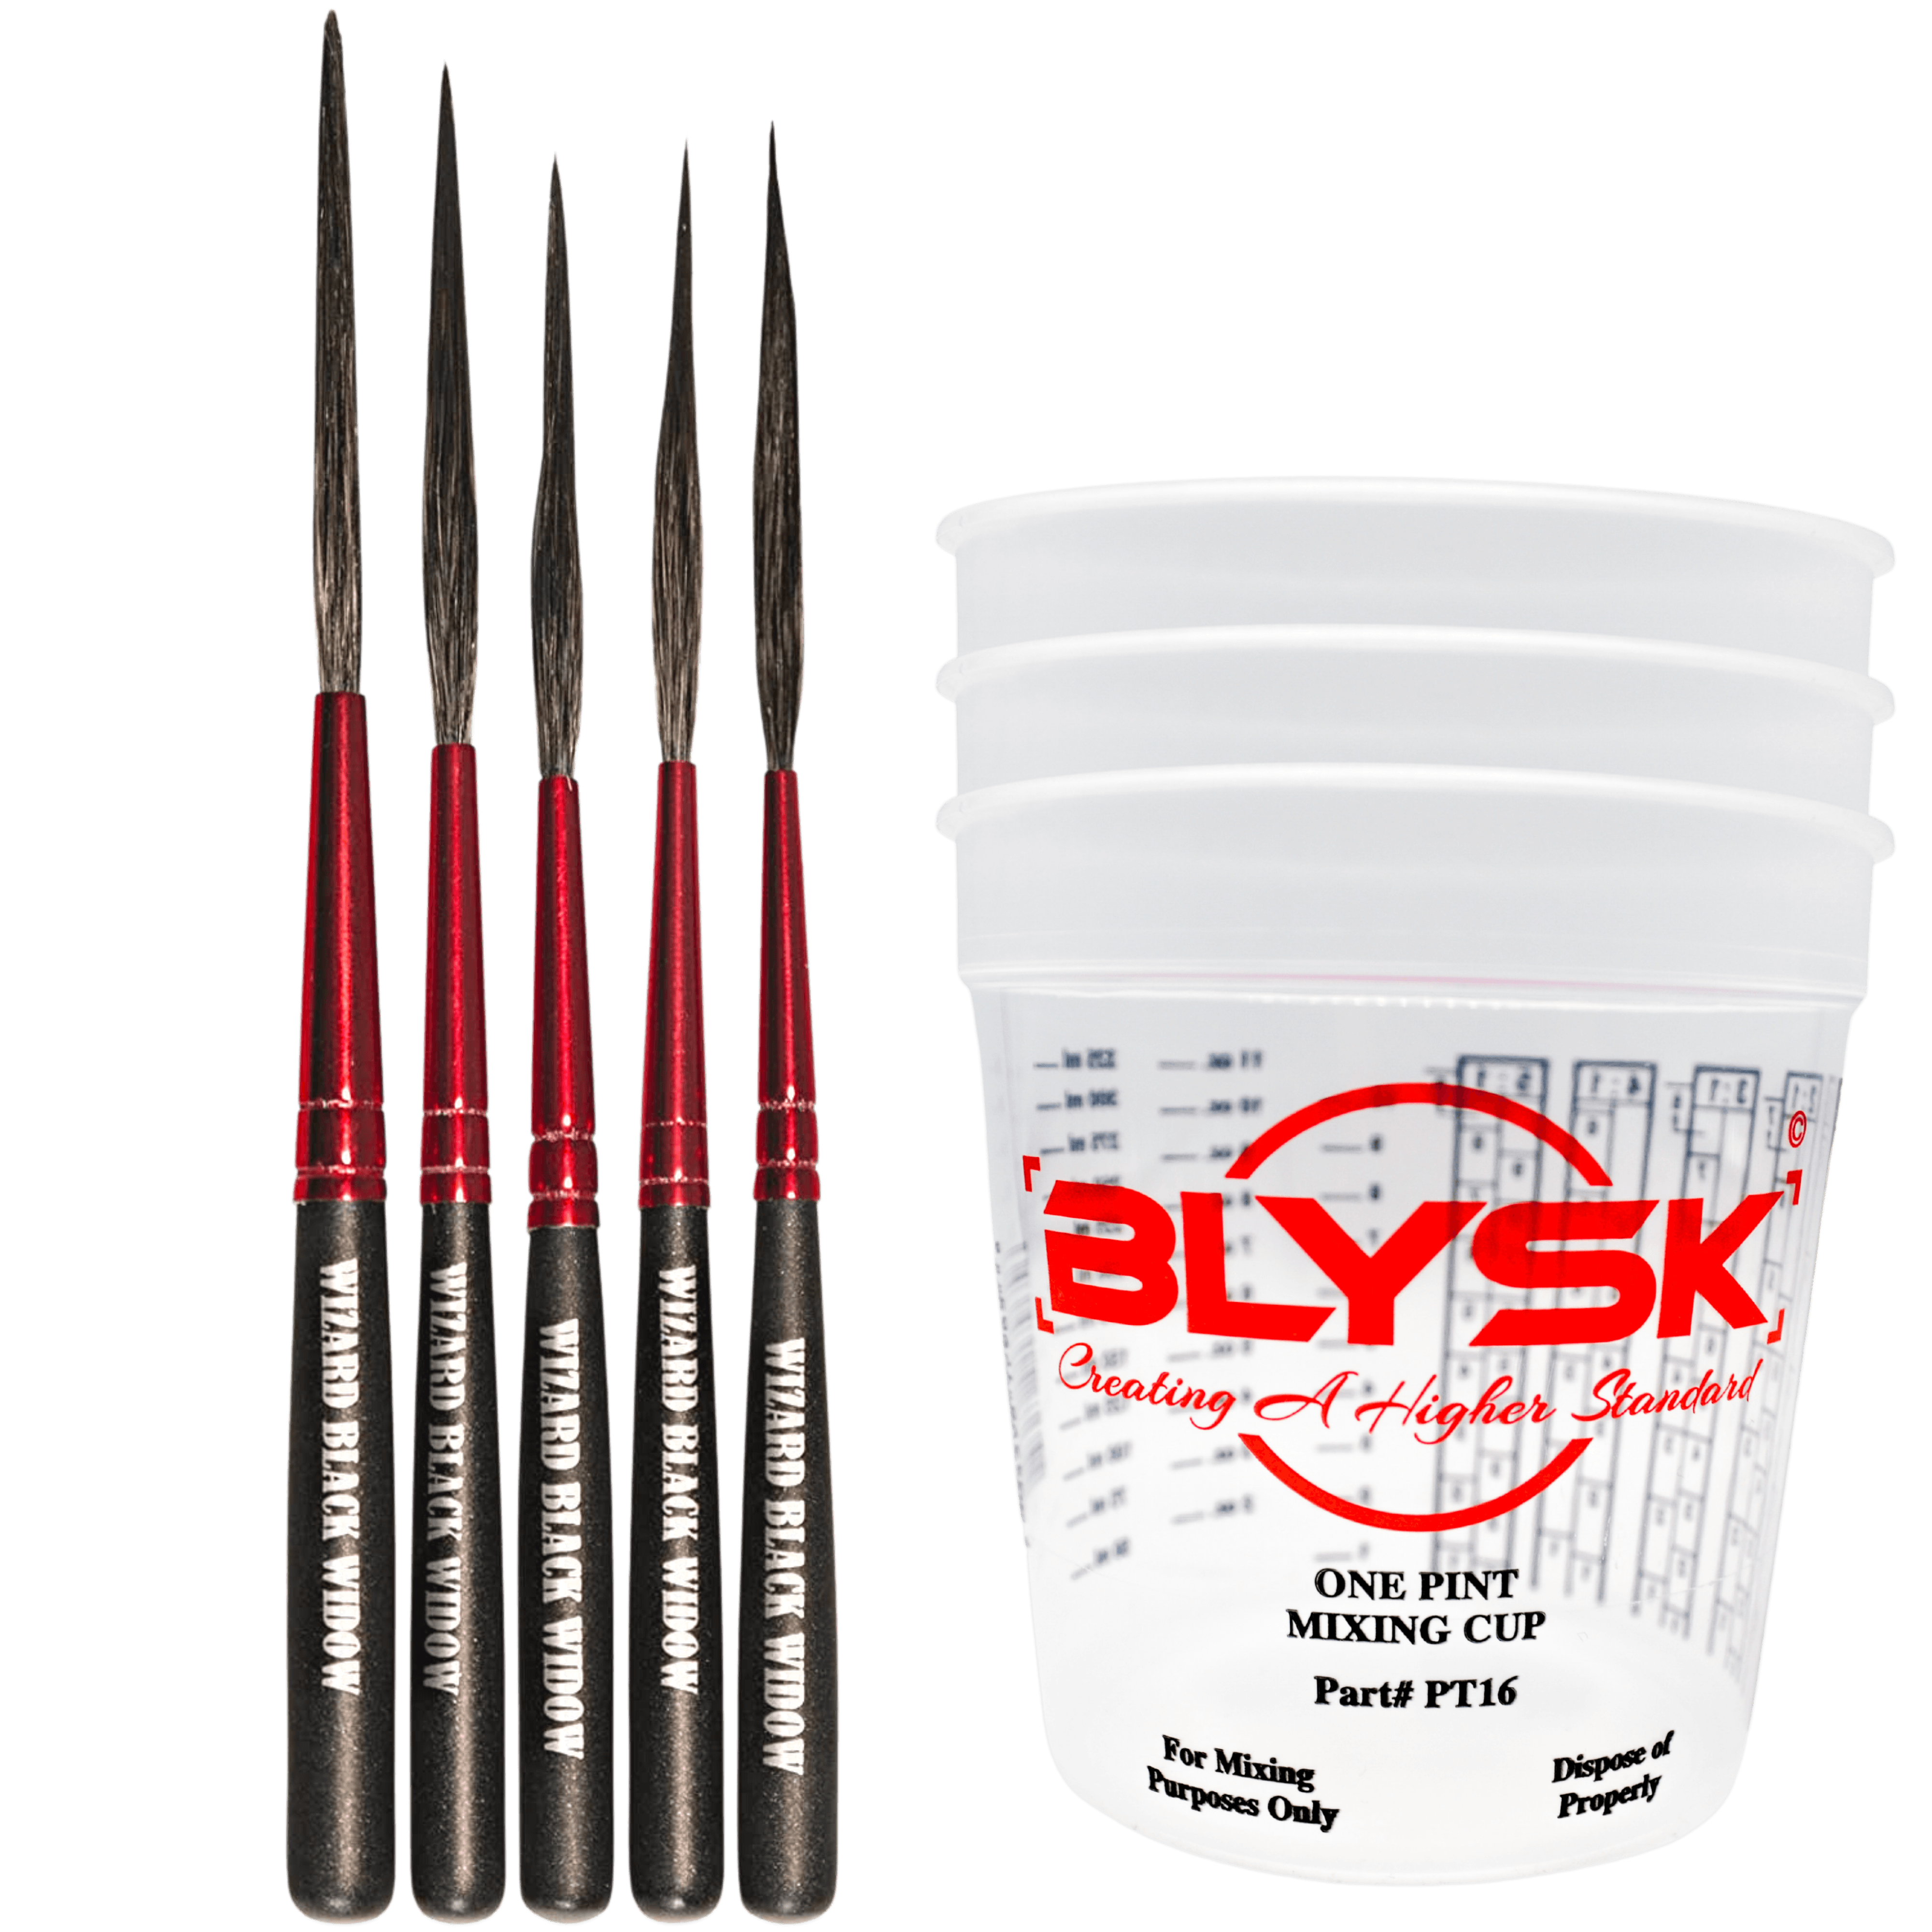 Blysk and Mack Wizard Black Widow Scroll Striper Bundle with Free Pint Mixing Cups, Scrolling, Pinstriping, Control, Striping Brush Set, Automotive